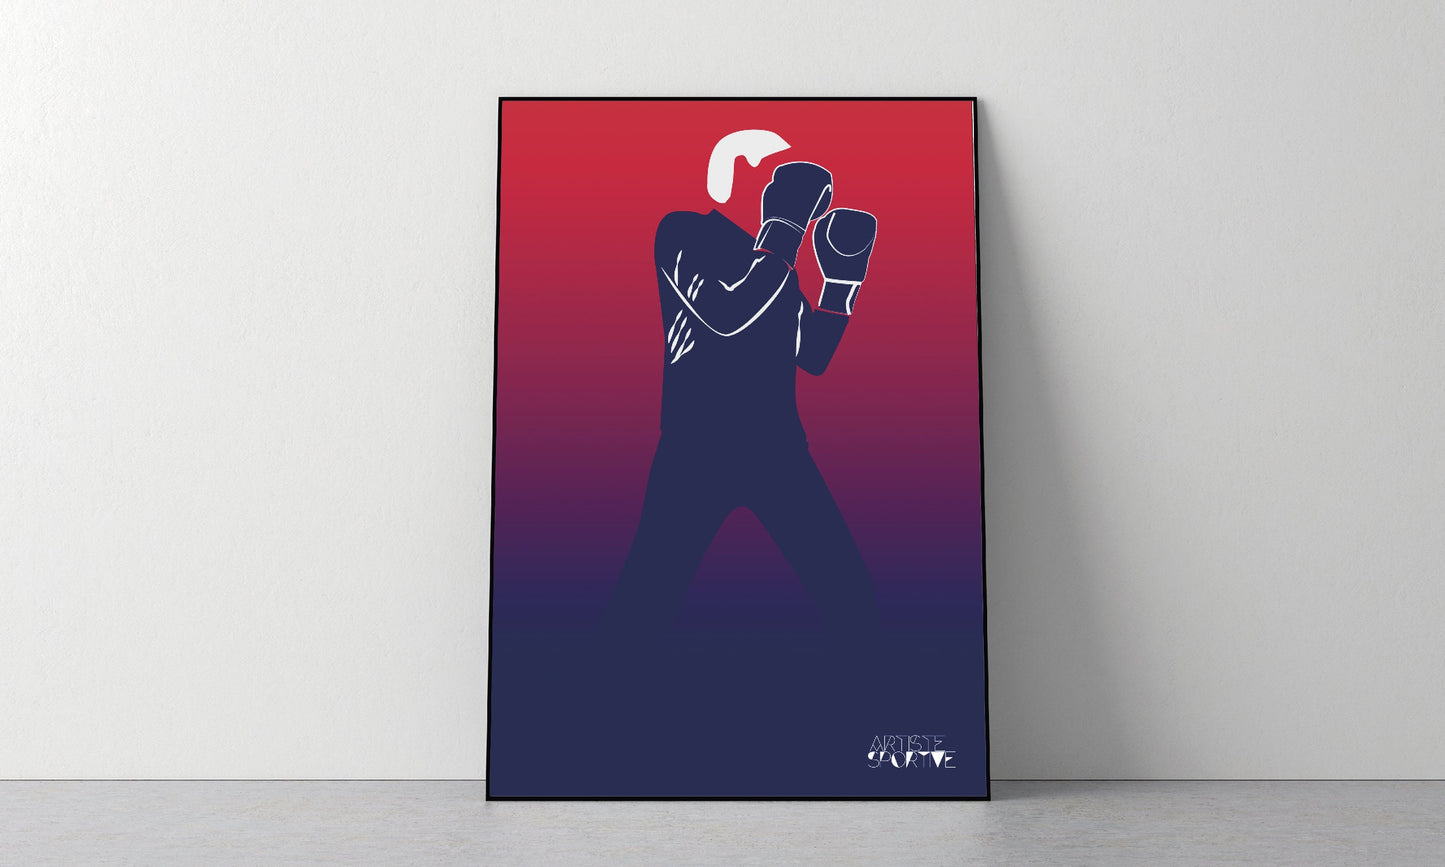 Boxing poster "In the ring"